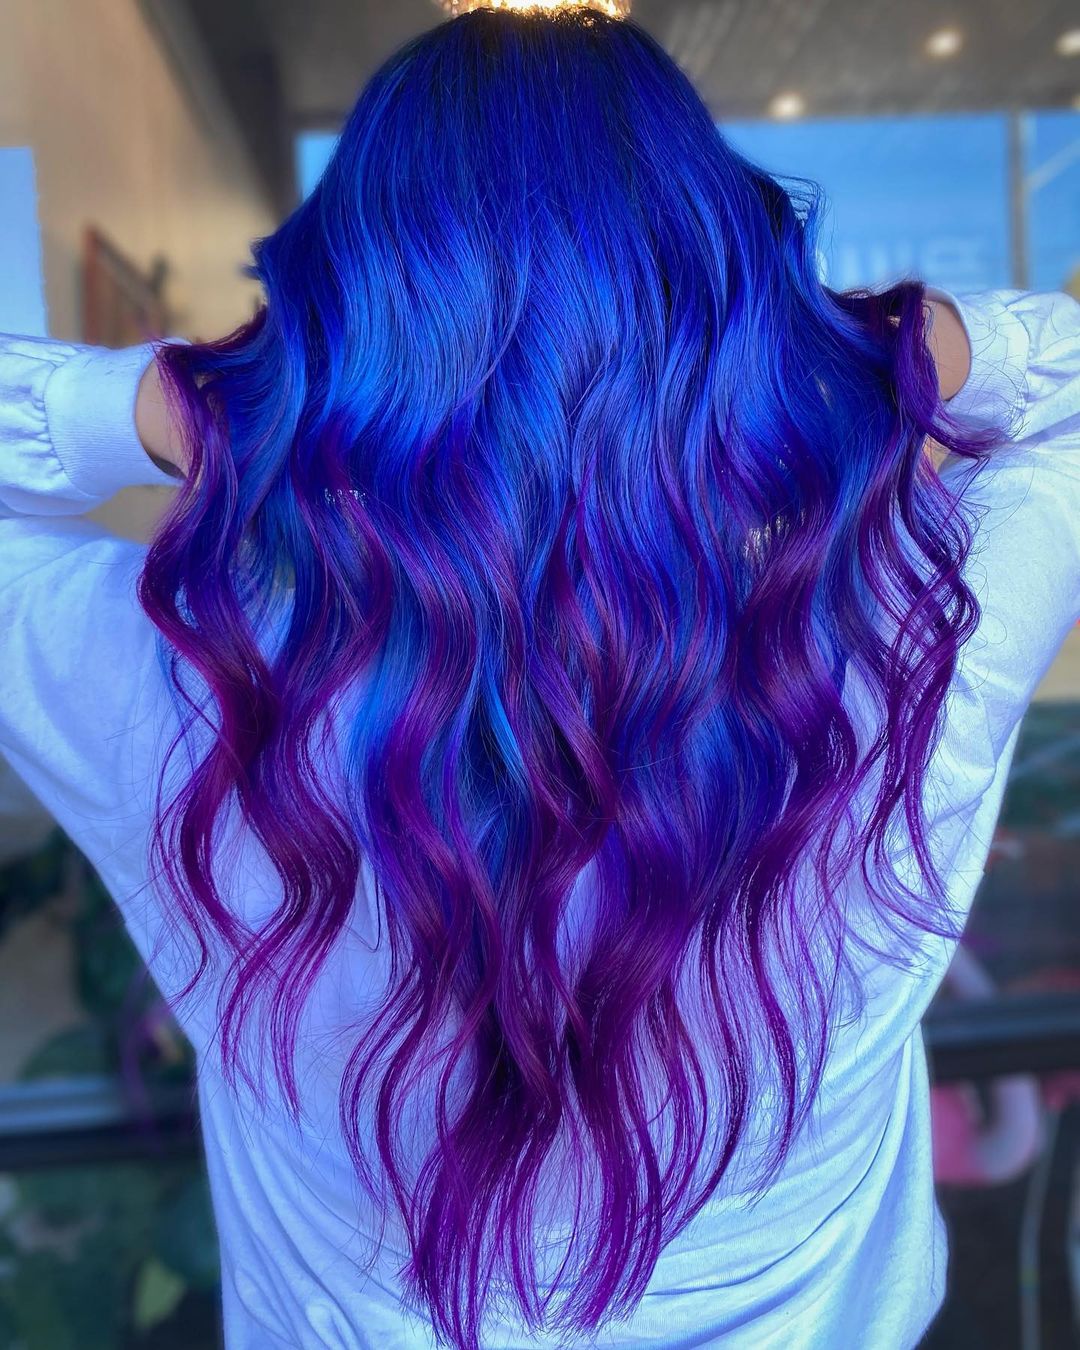 Neon Blue to Purple on Long Hair